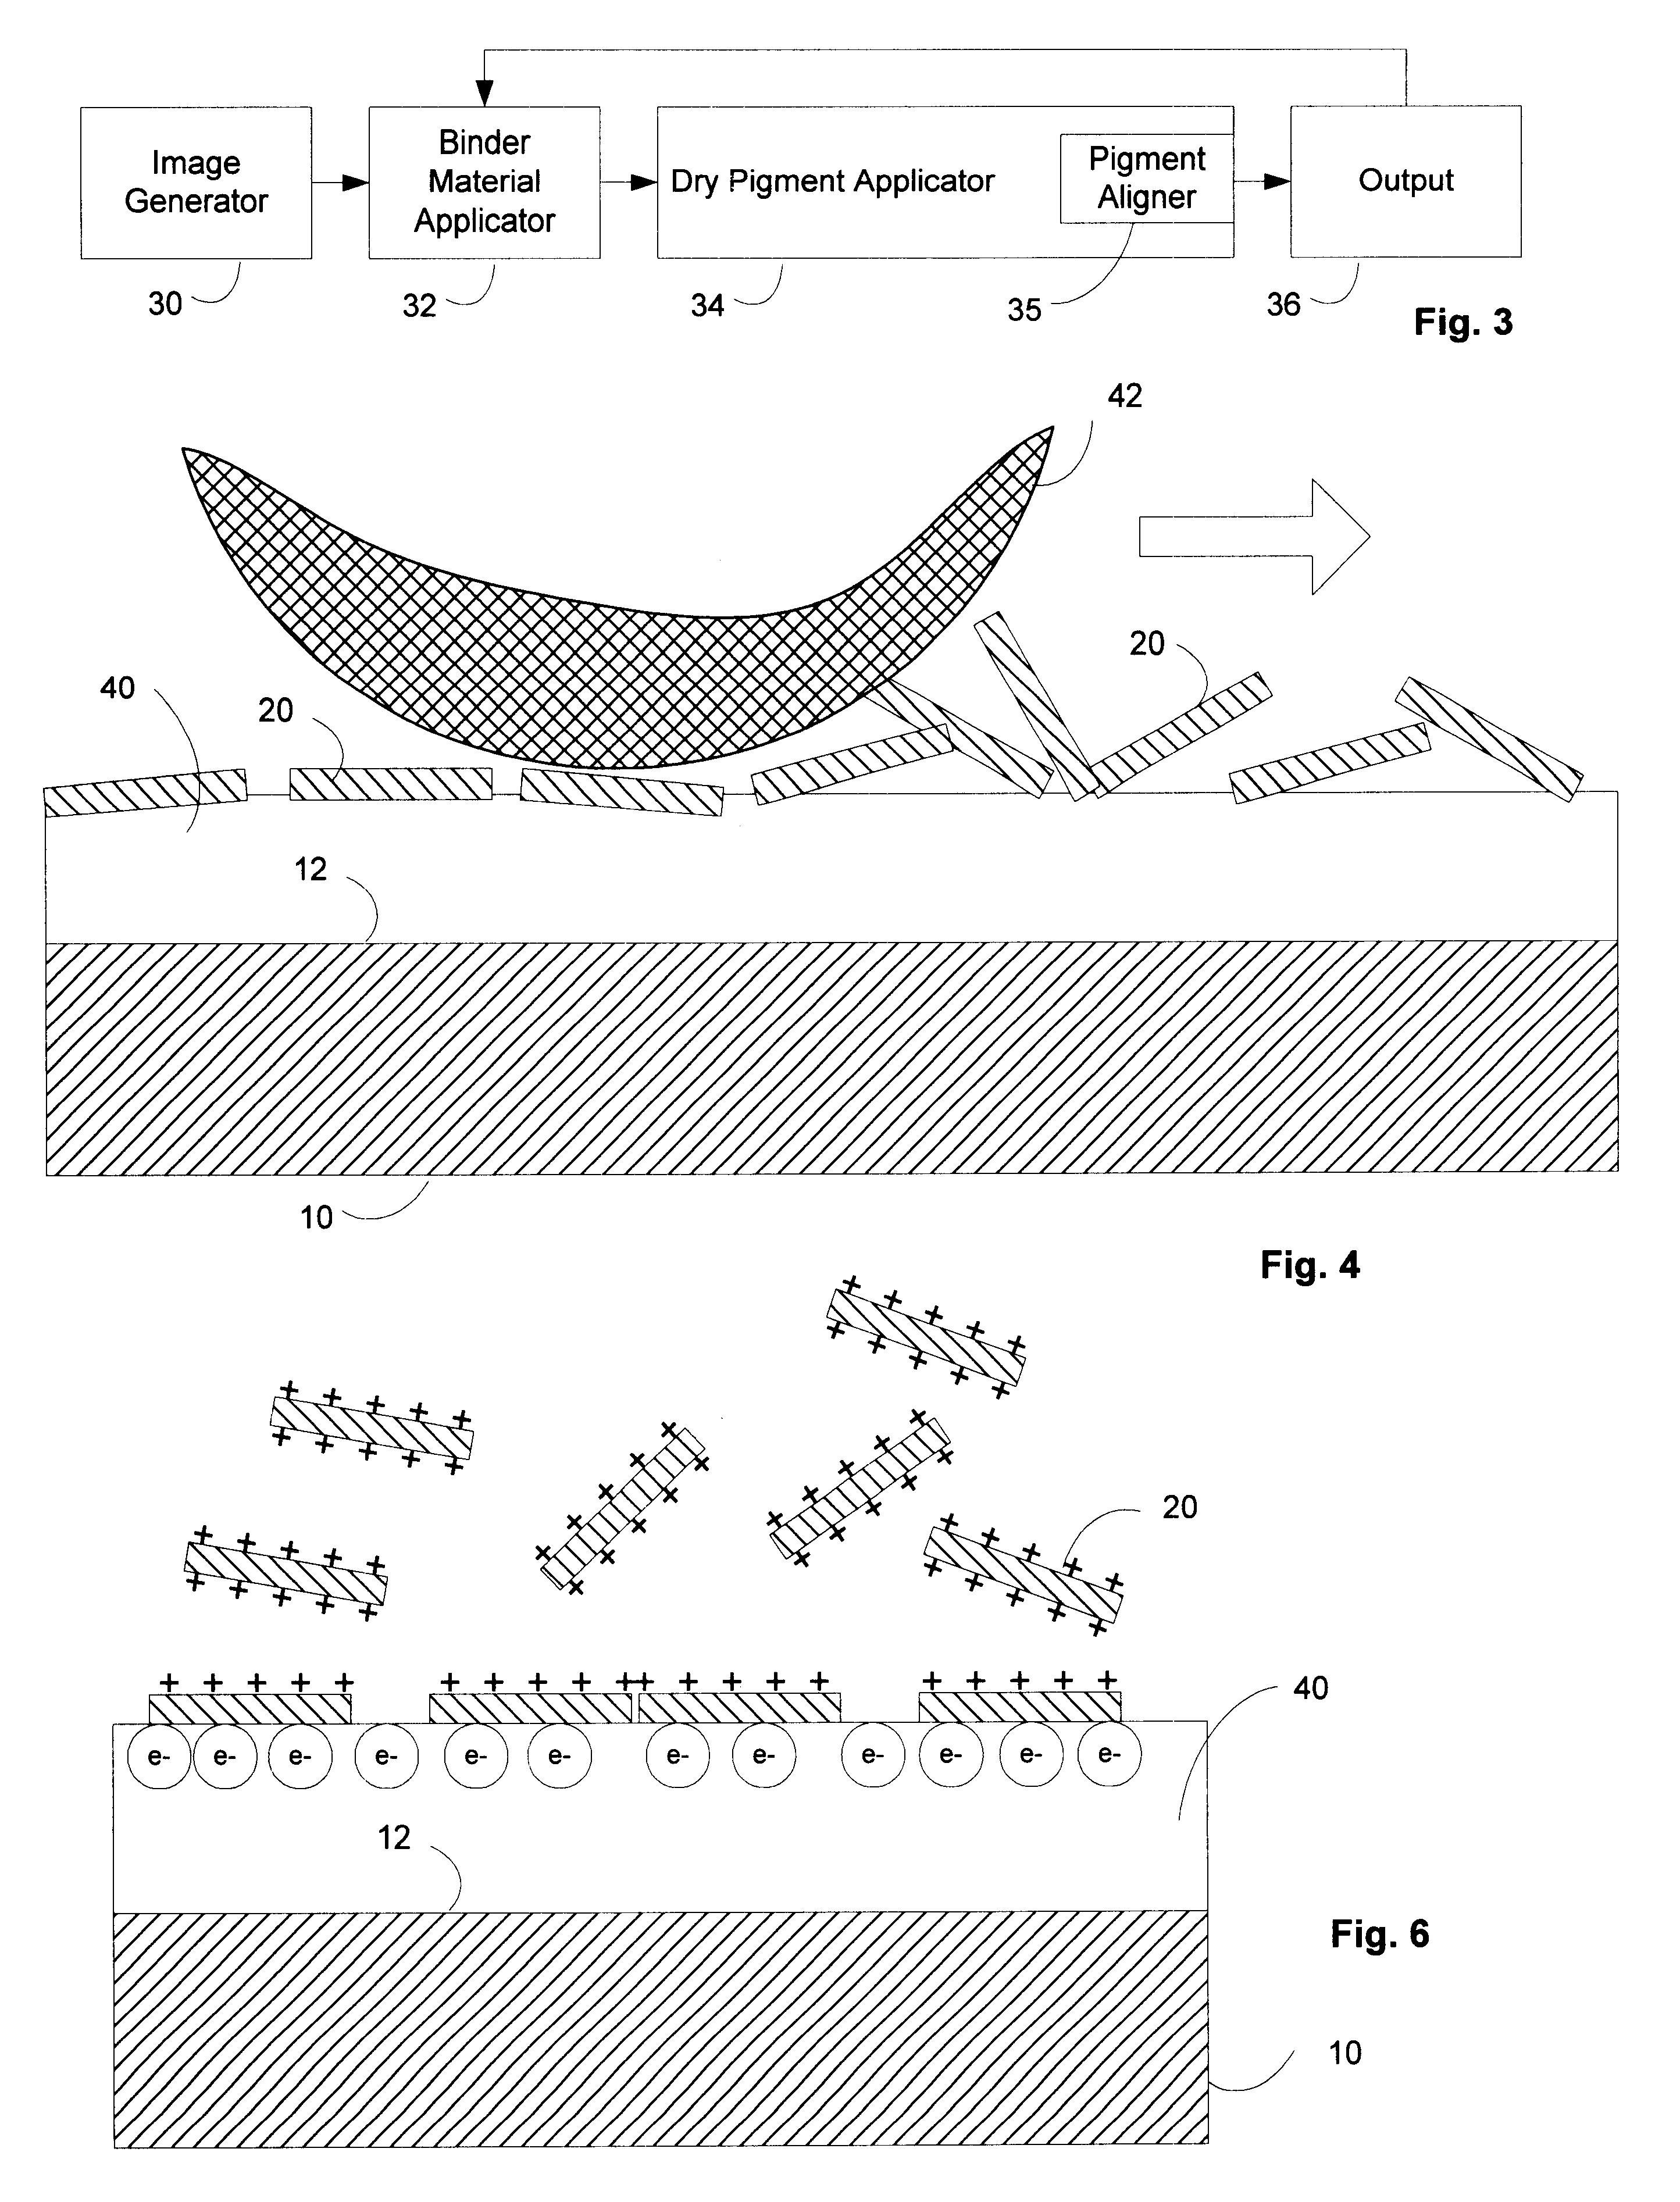 Computer-based system for producing multi-color multilayer images on substrates using dry multi-colored cholesteric liquid crystal (CLC) pigment materials applied to binder material patterns